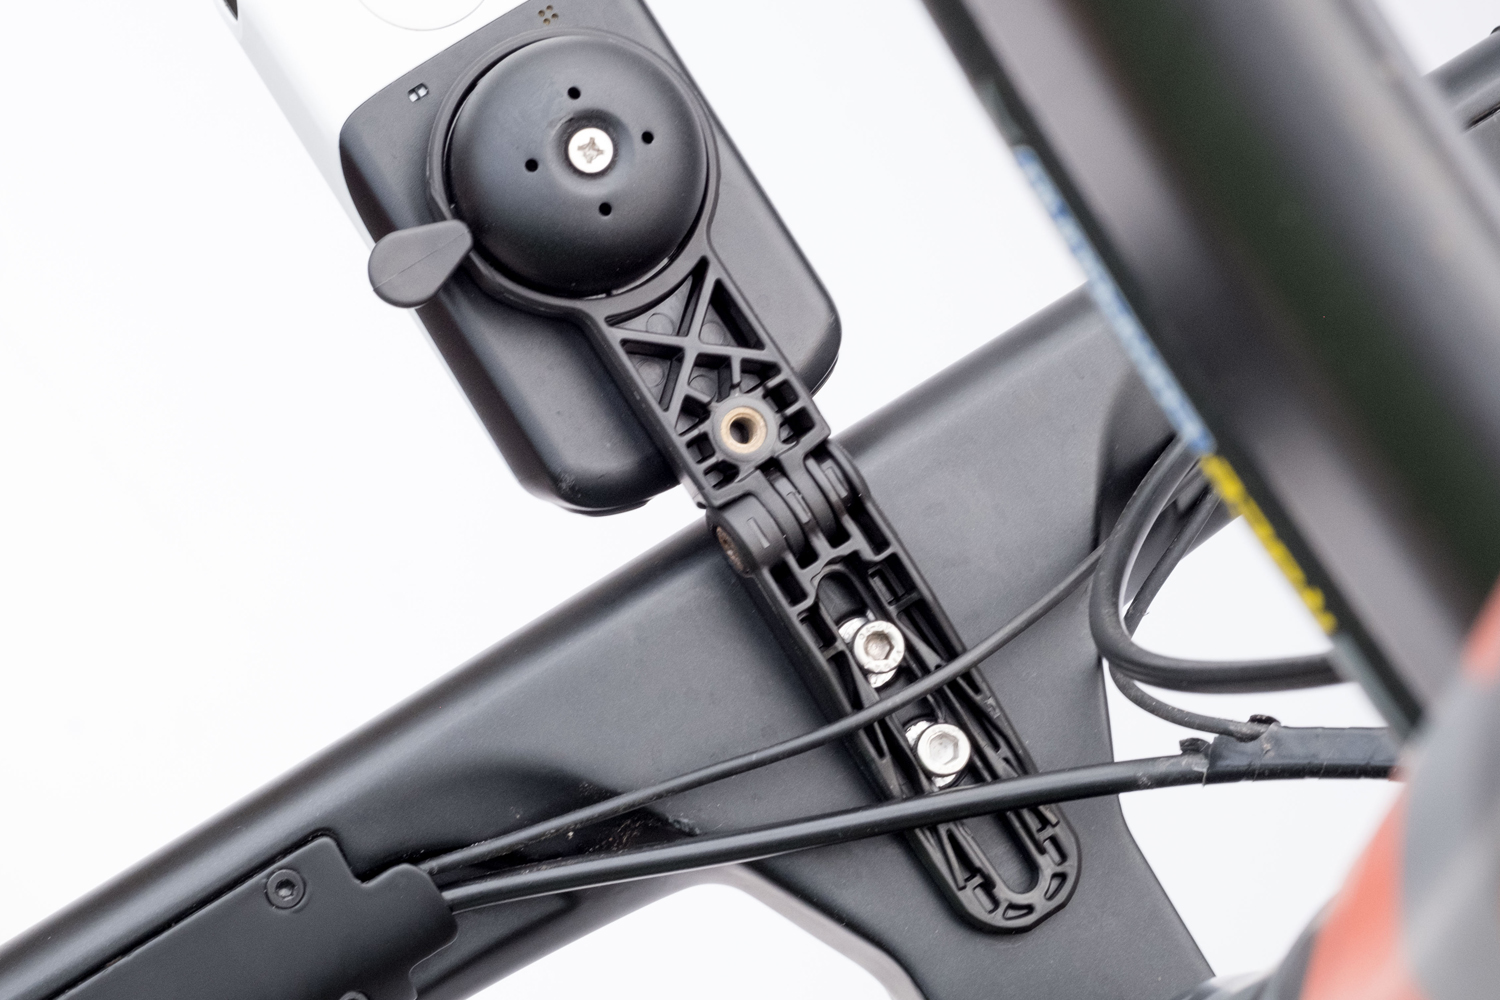 HideMyBell hides bells and GPS mounts for FI-Mount bars